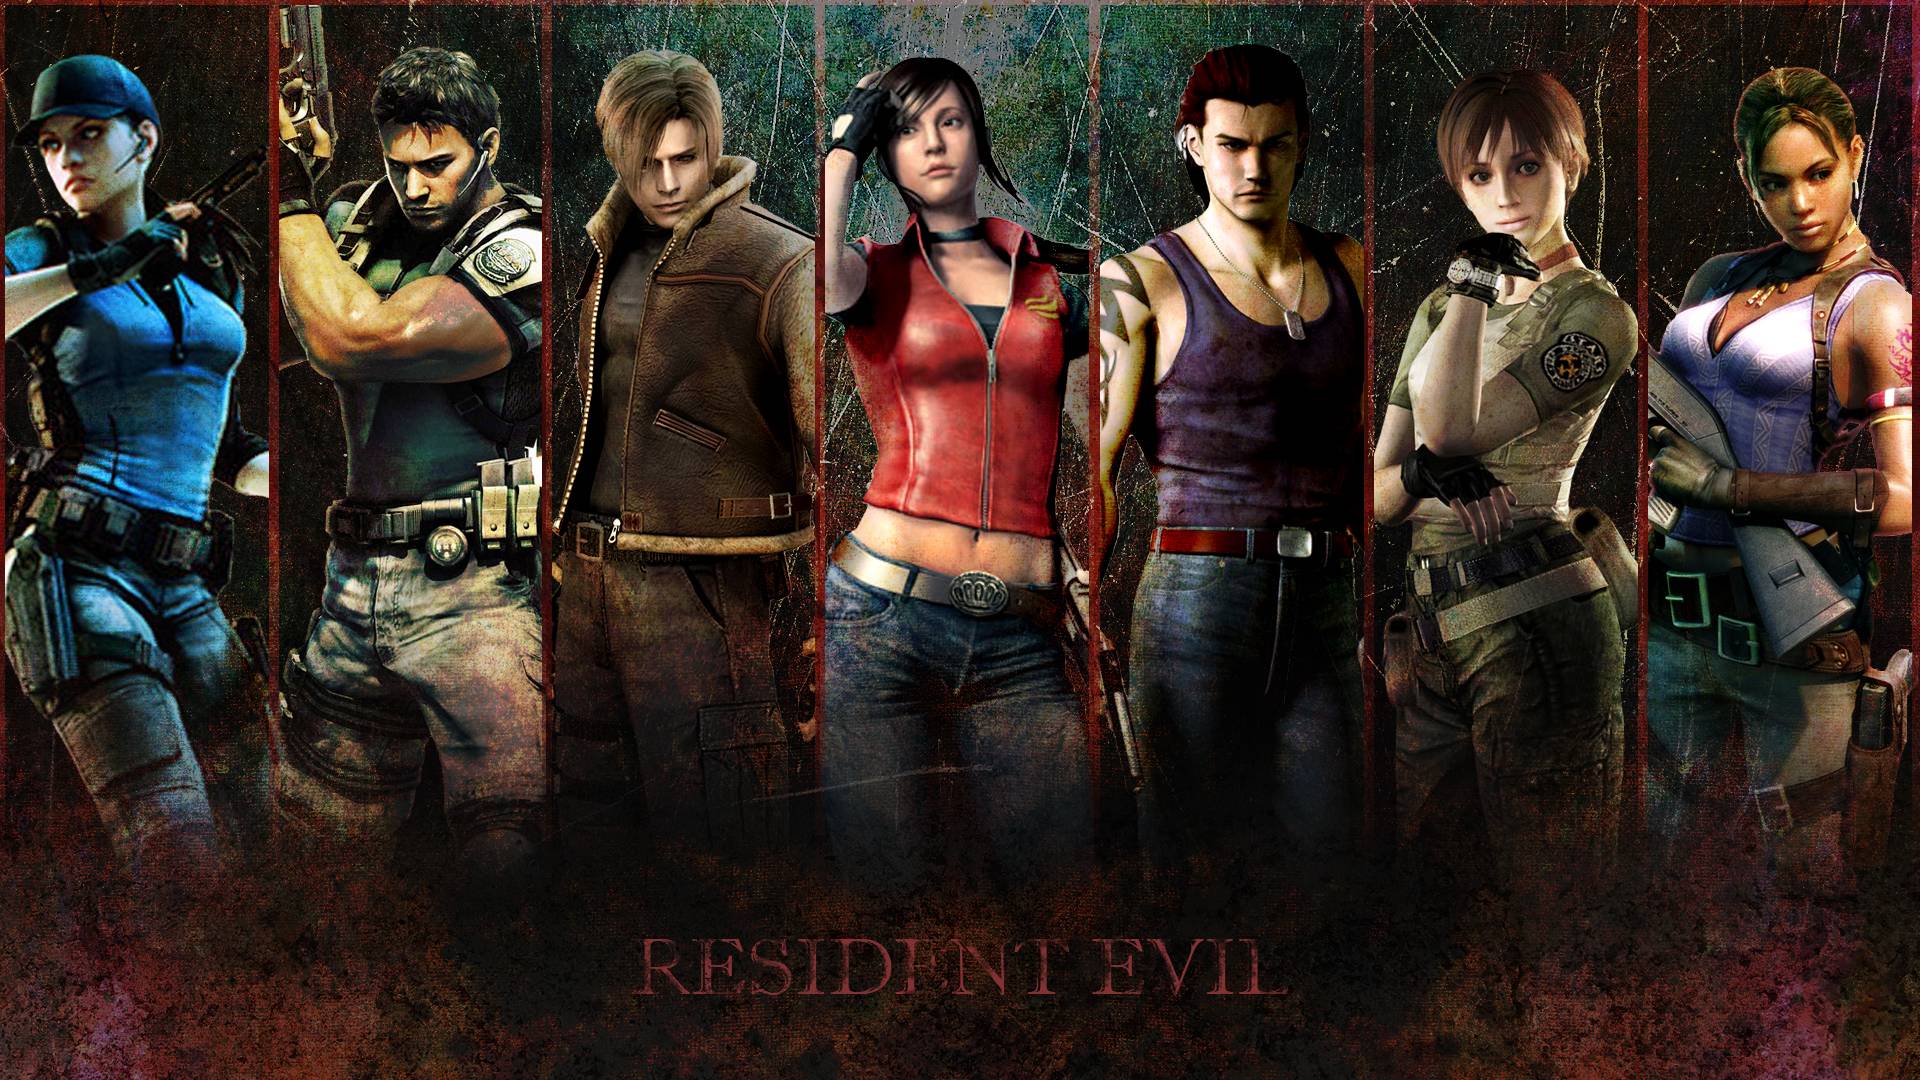 Resident Evil Wallpaper: Excellent Wallpaper to Use